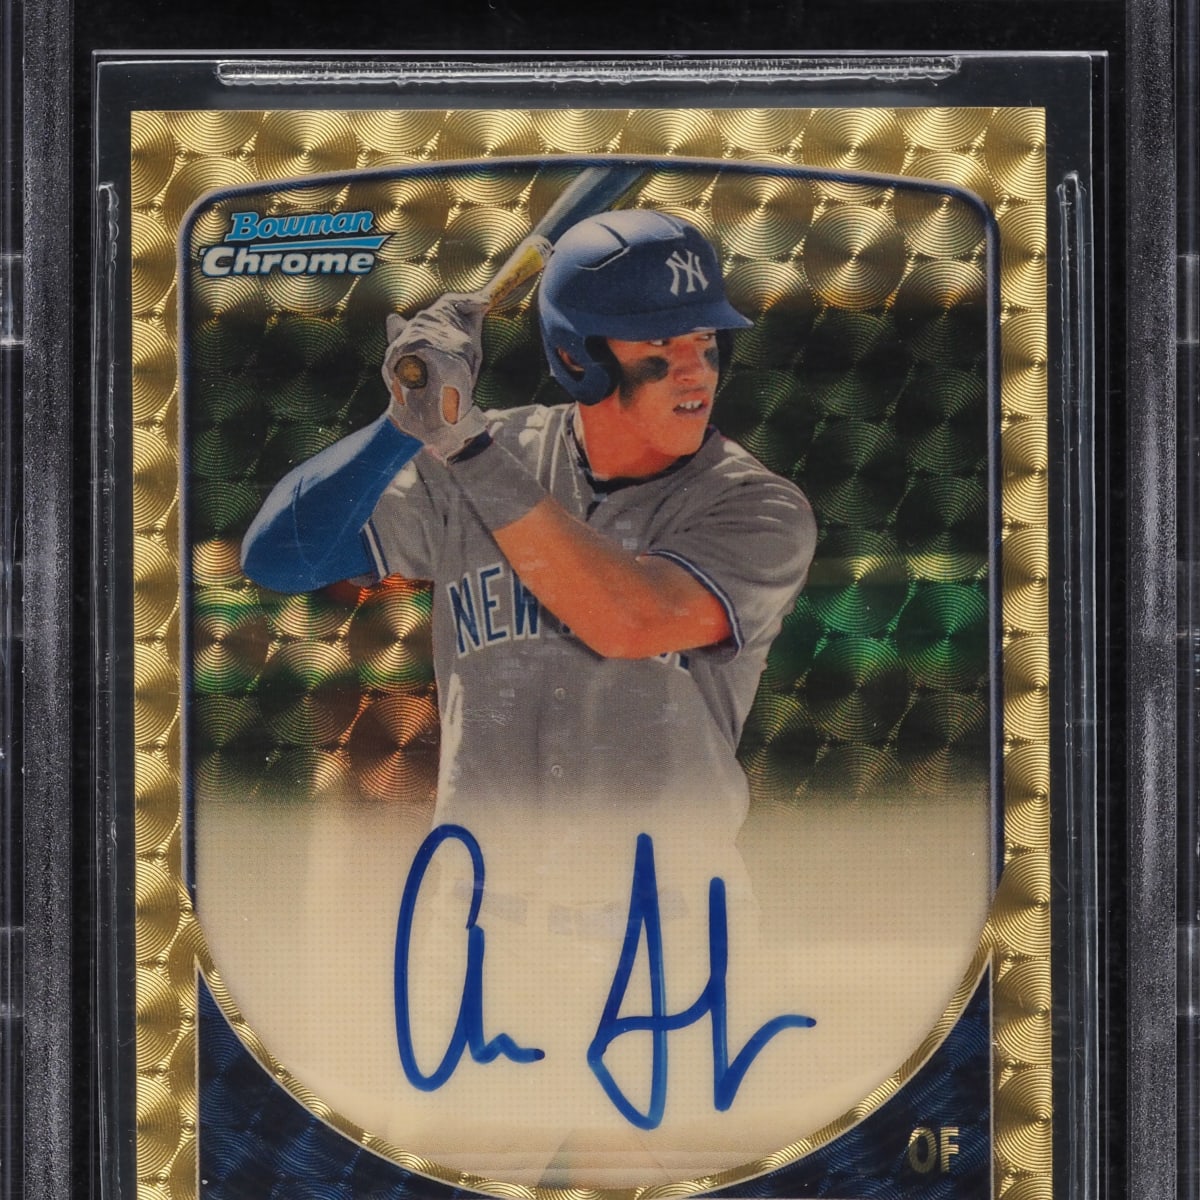 Aaron Judge rookie card sets record in PWCC May auction - Sports